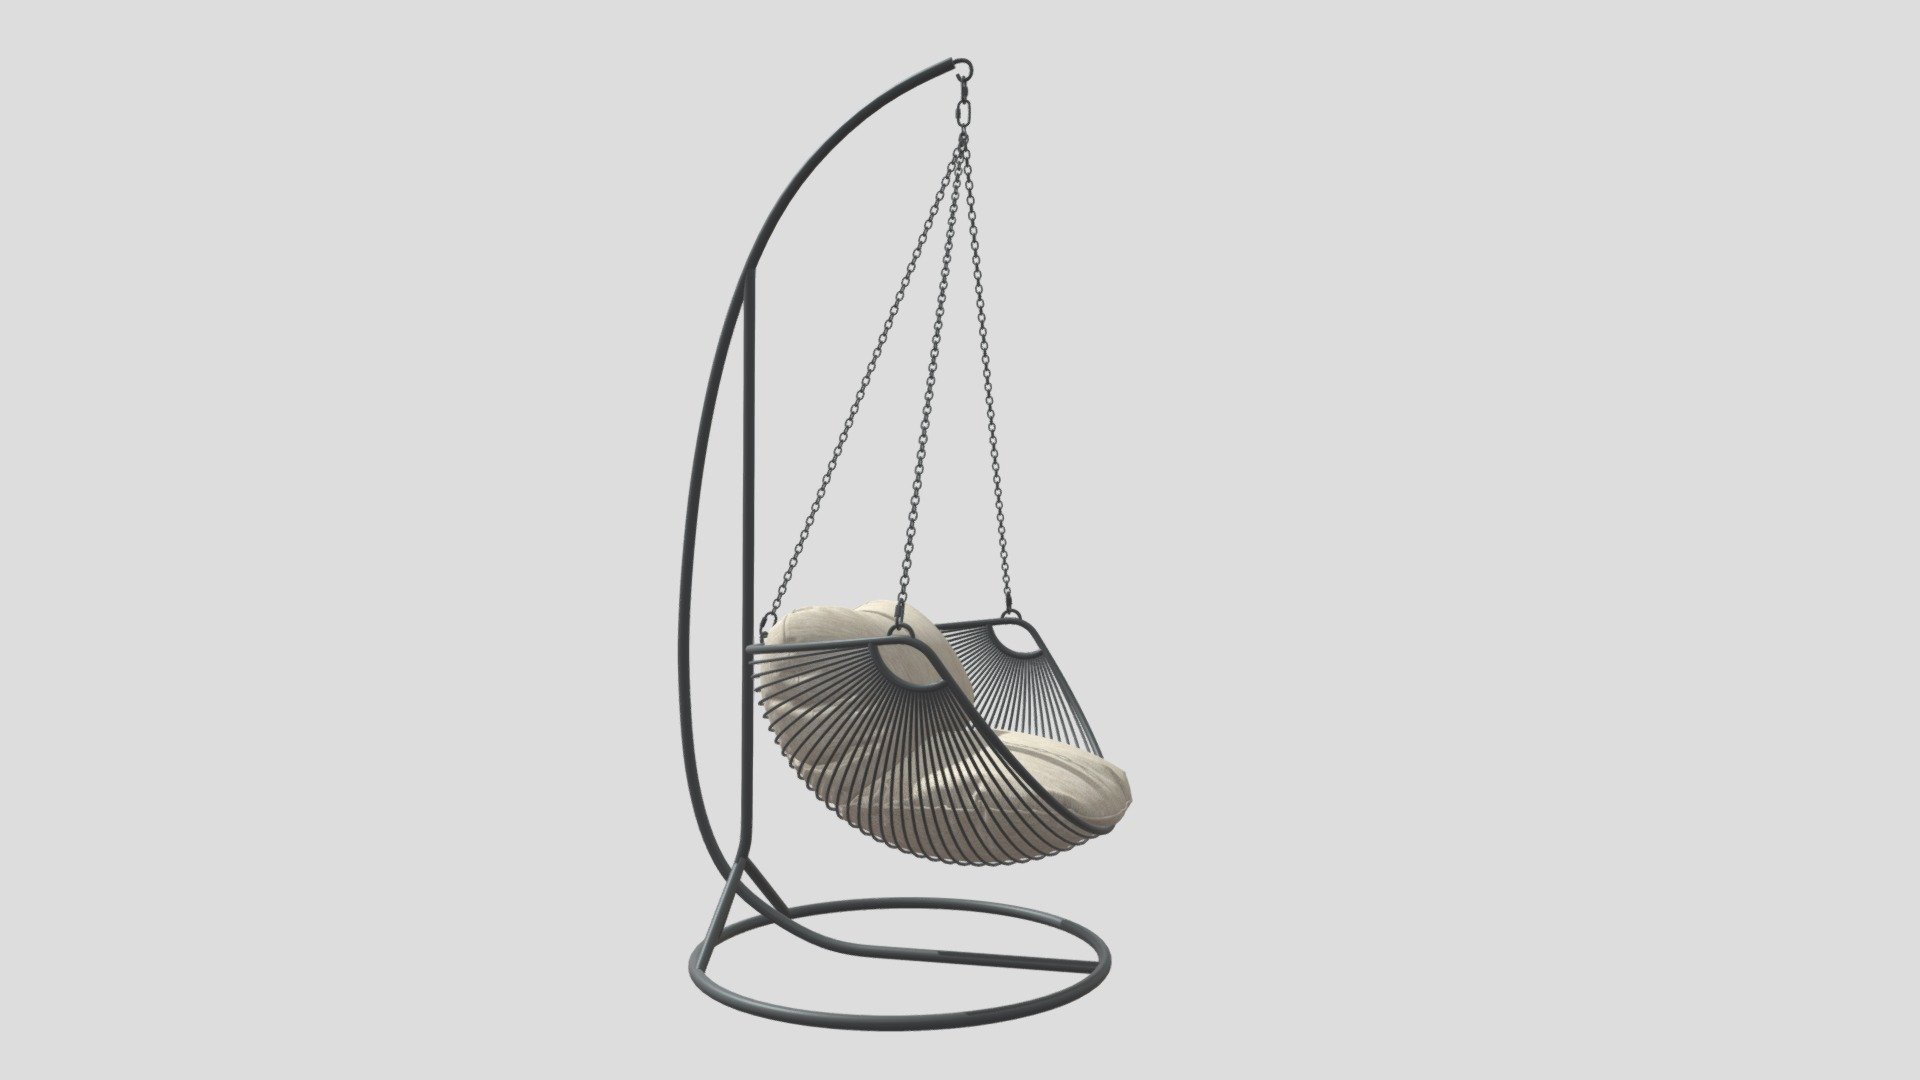 3D model of a beautiful swing!
Great for scenes.
High poly!
Materials configured for Cycles.
Format: .blend (Blender 2.93 archive)
Good bargain! - Athena suspended balance (blender archive) - 3D model by freela3d_marcos 3d model